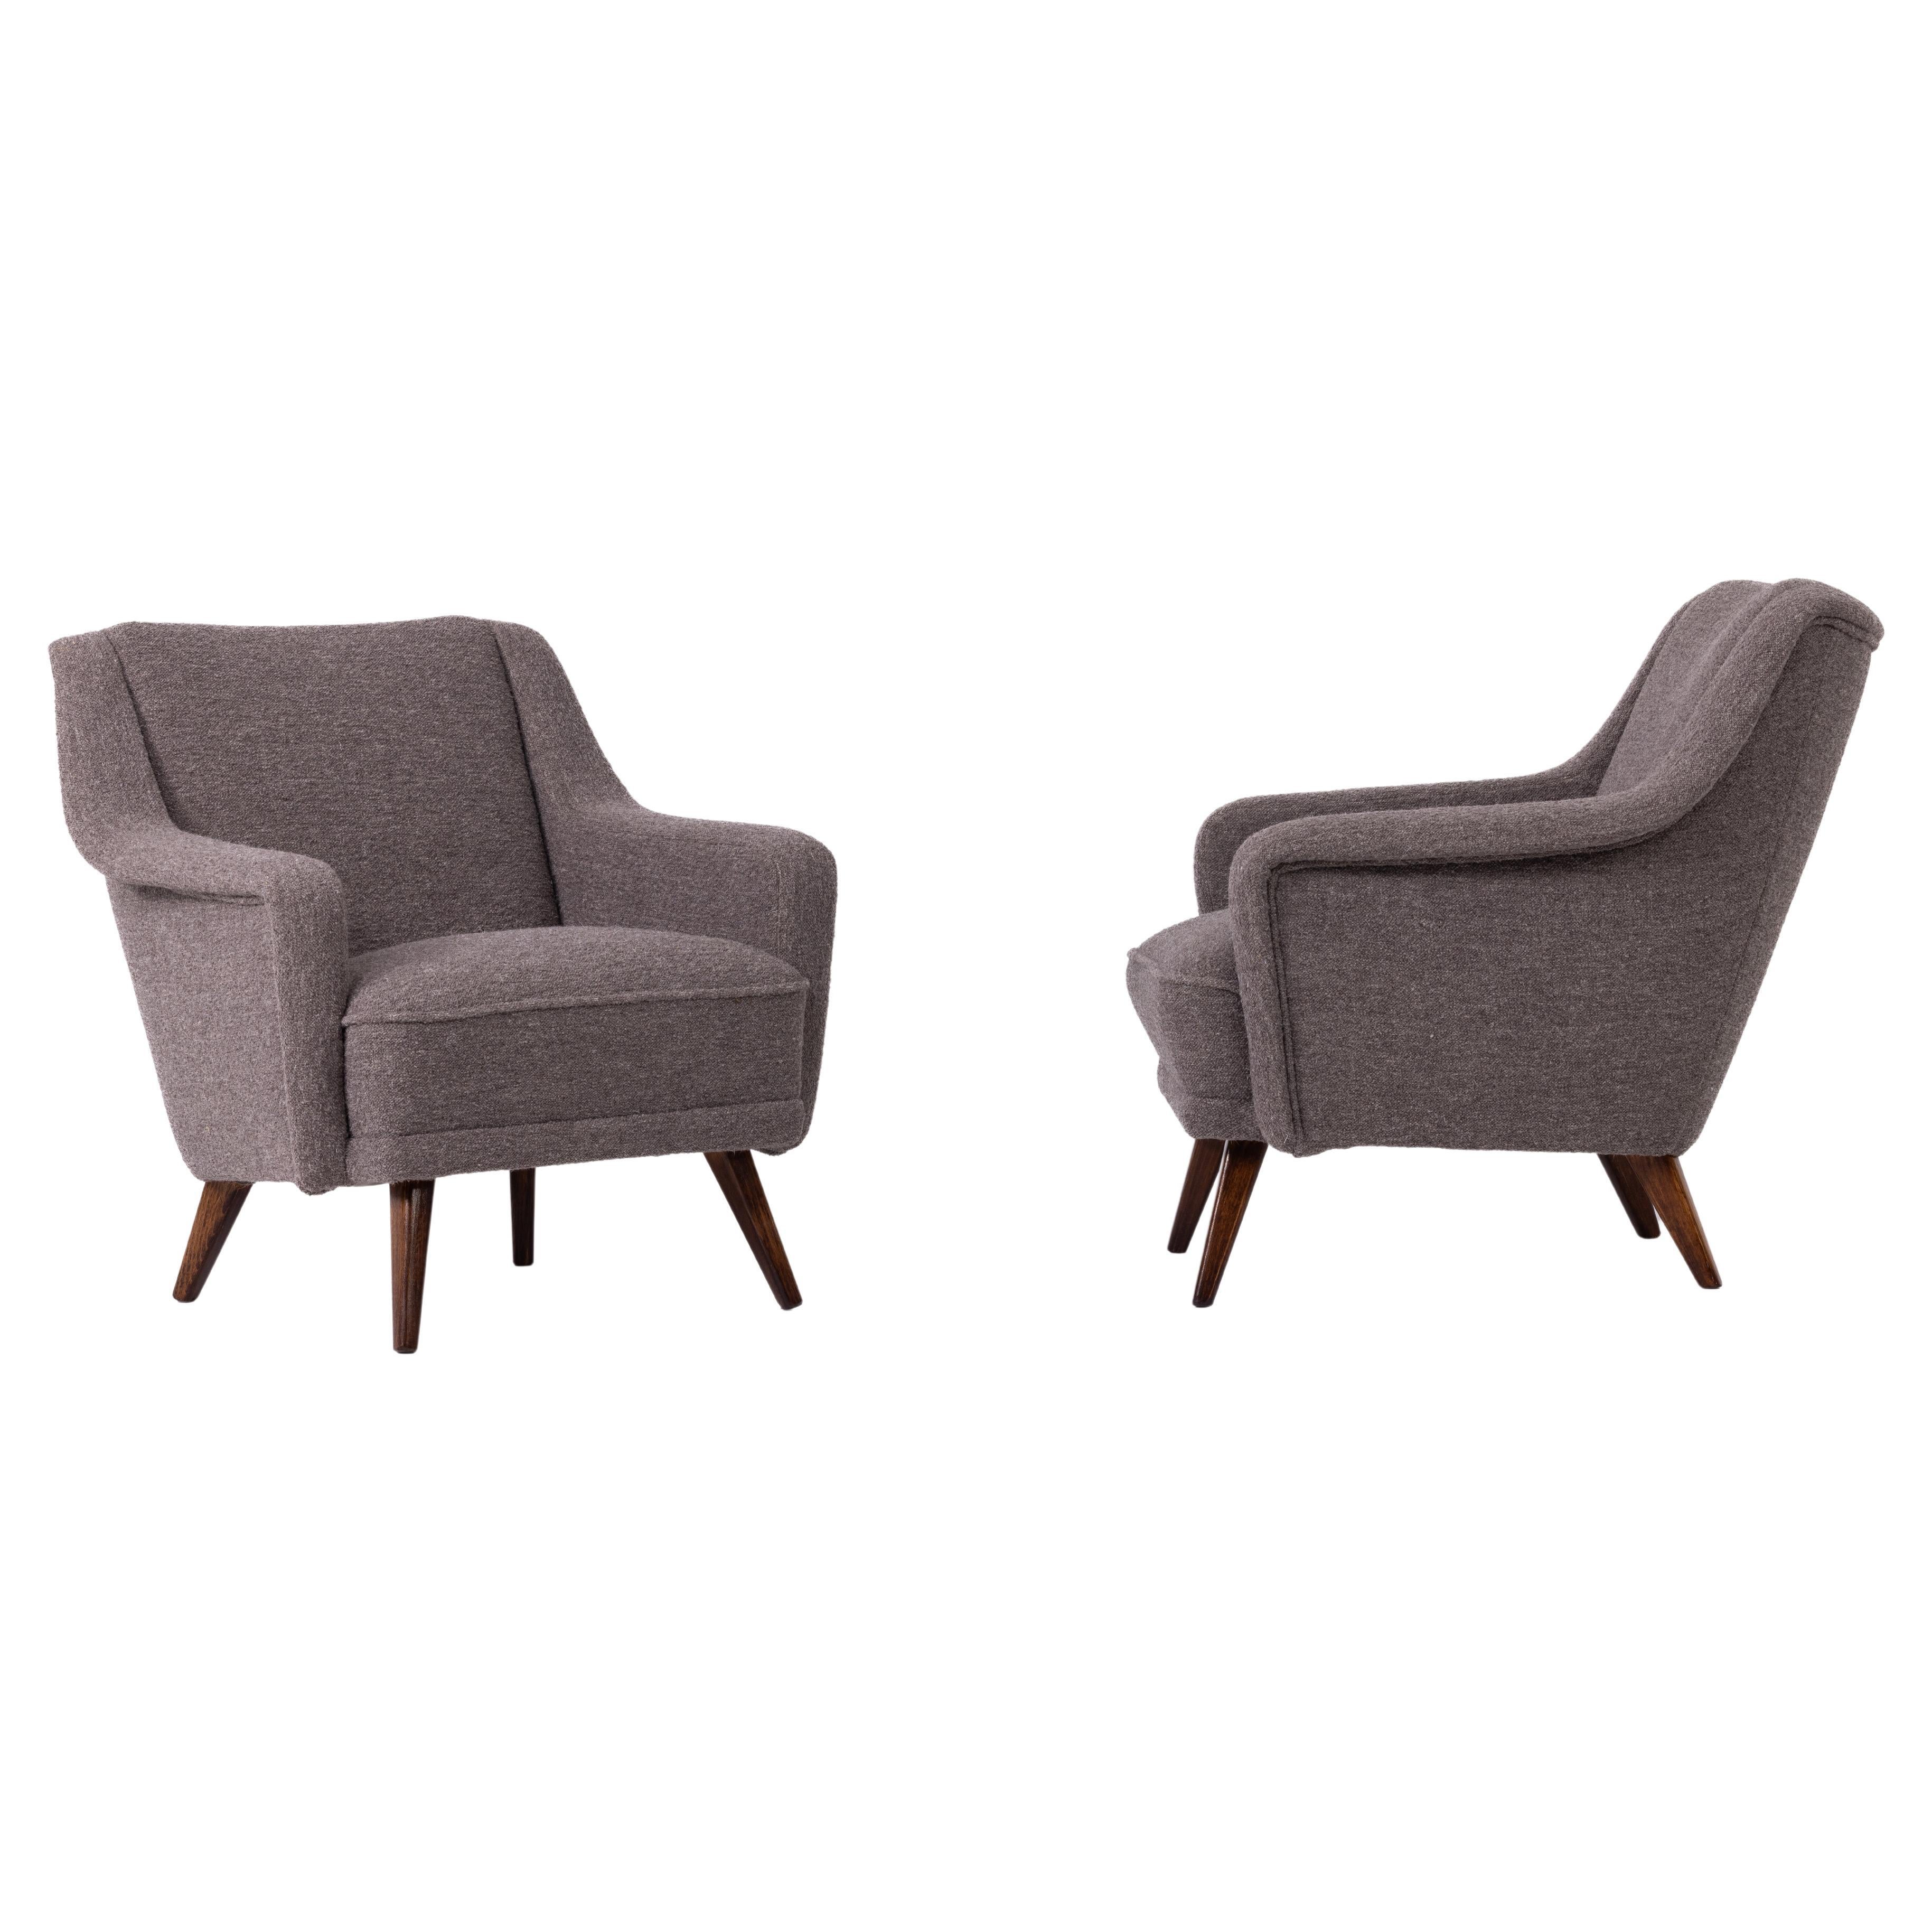 Pair of Mid-century armchairs, Austria 1950s, Newly Reupholstered, Linen Fabric